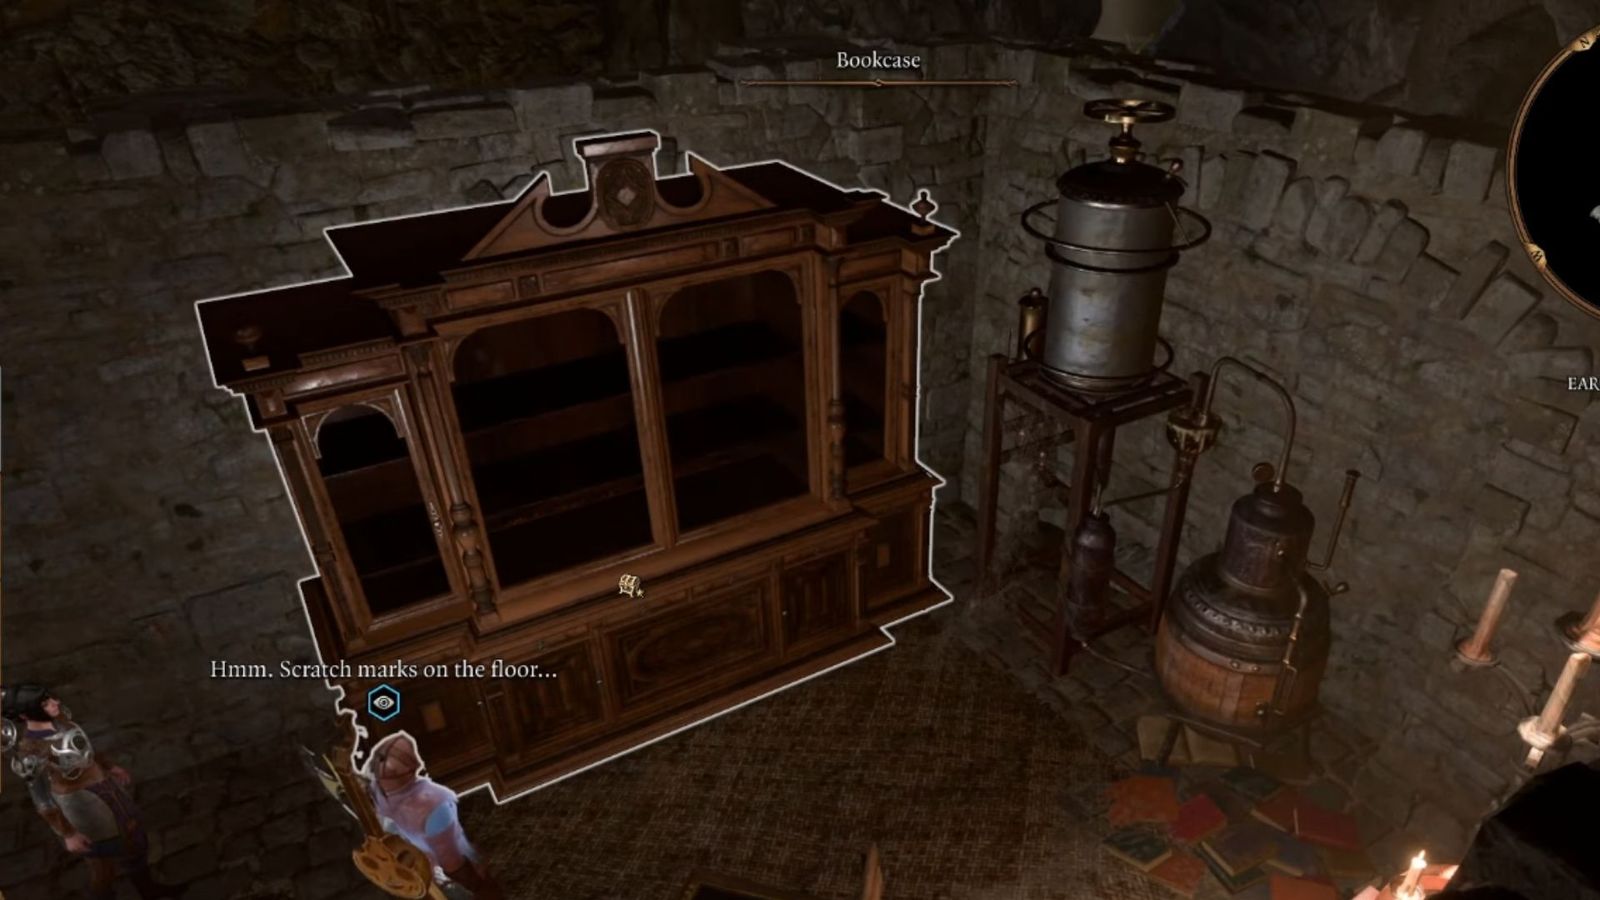 A screenshot of the bookcase in the Blighted Village Cellar in Baldur's Gate 3.